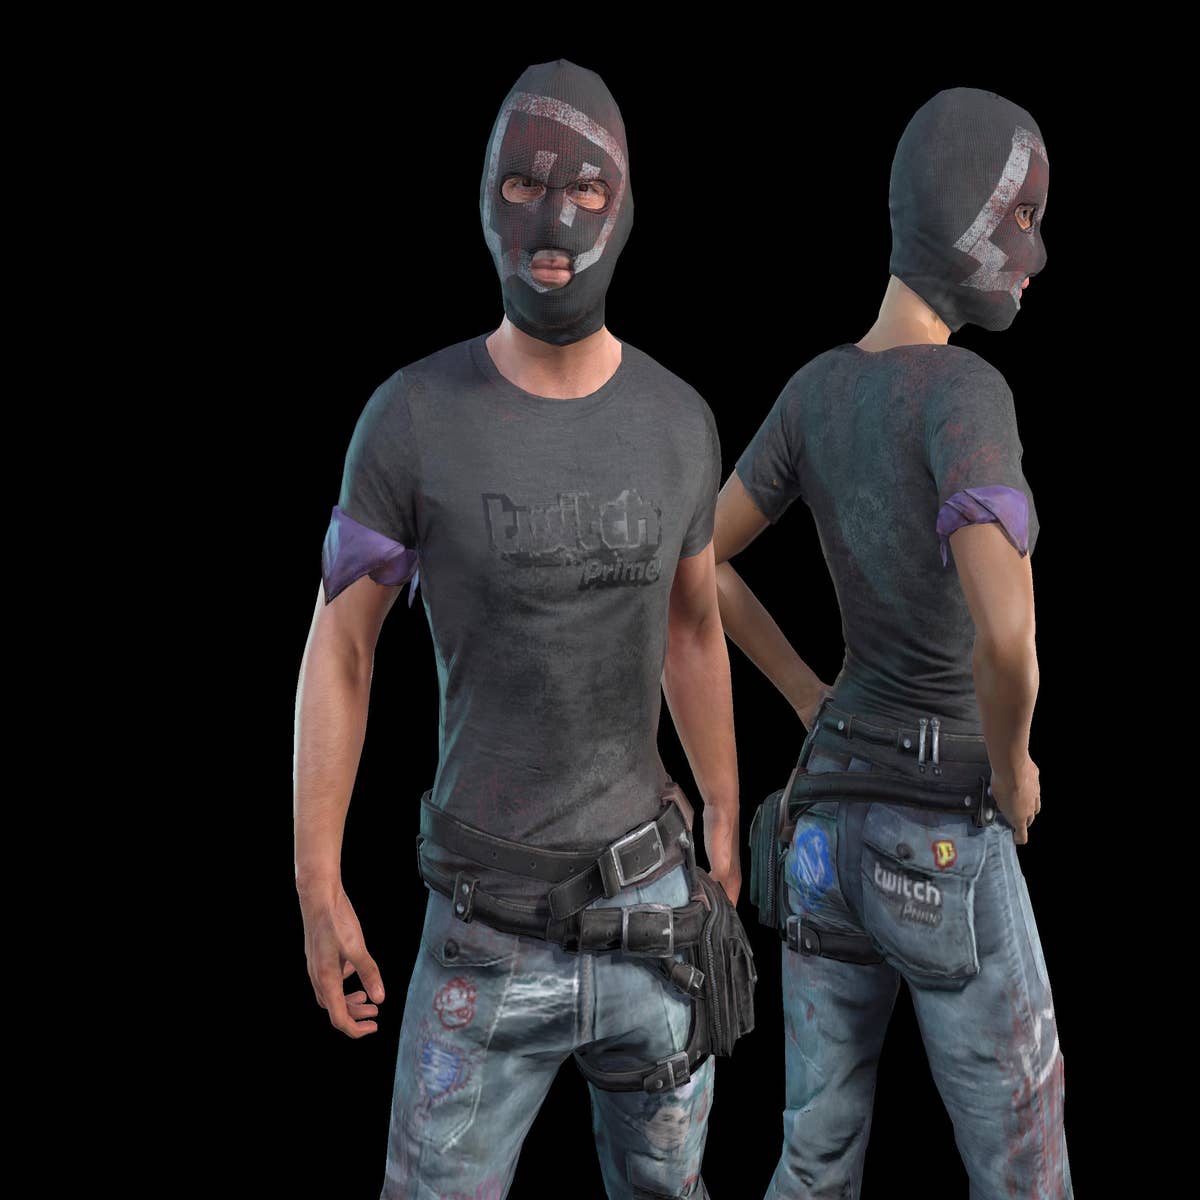 Twitch Prime members are getting exclusive Battlegrounds loot, including a  balaclava